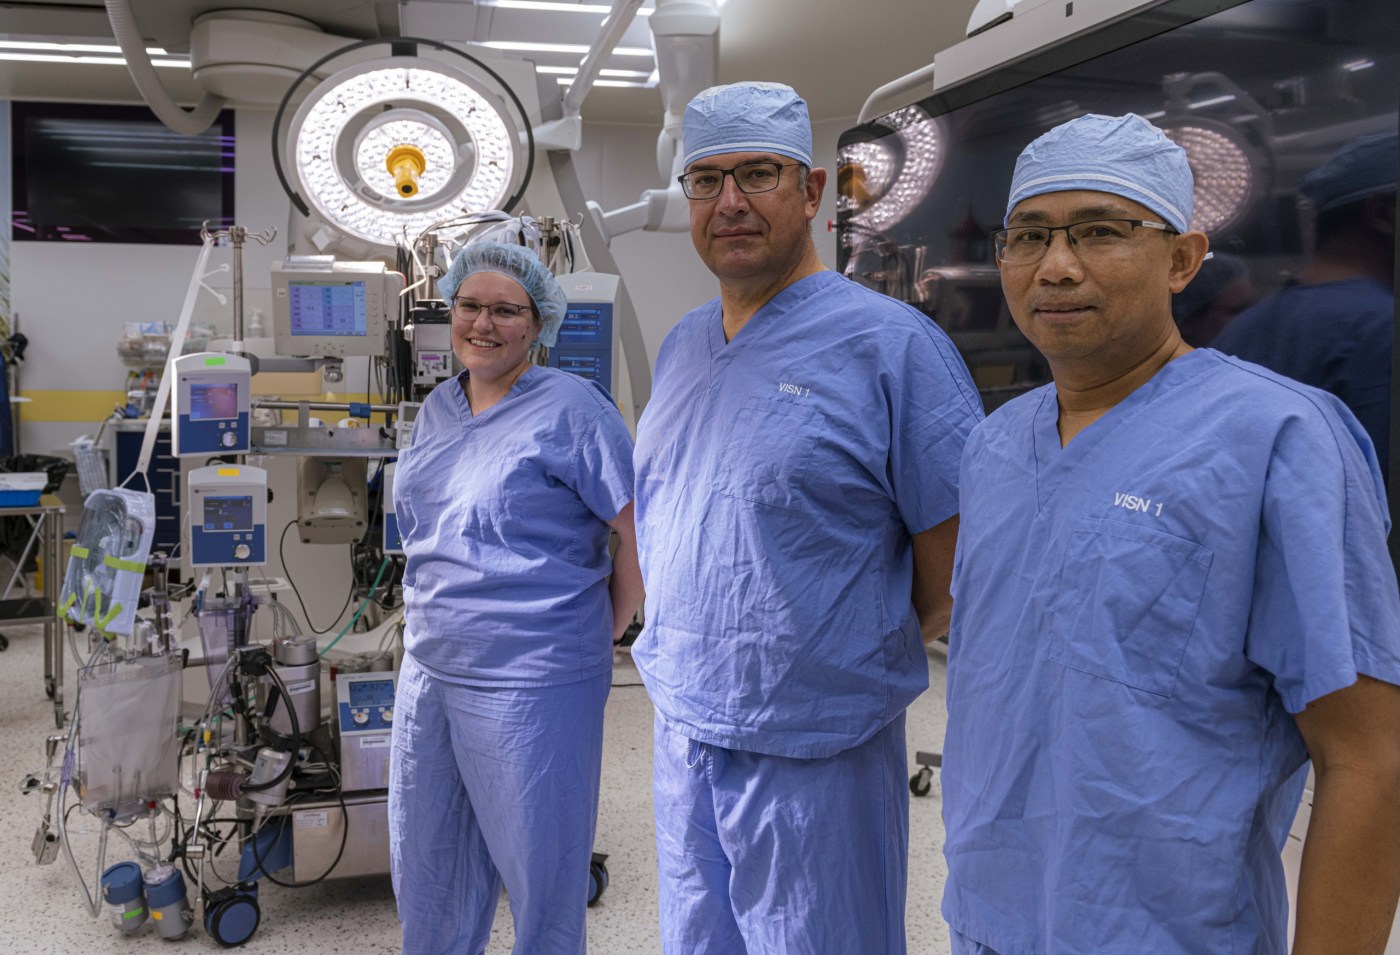 (From left) Drs. Lauren Kennedy-Metz and Marco Zenati and chief perfusionist Rithy Srey stand near a heart-lung machine in an operating room at the West Roxbury VA in Massachusetts. The team is studying how artificial intelligence can help perfusionists optimize use of the machines during cardiac surgery.